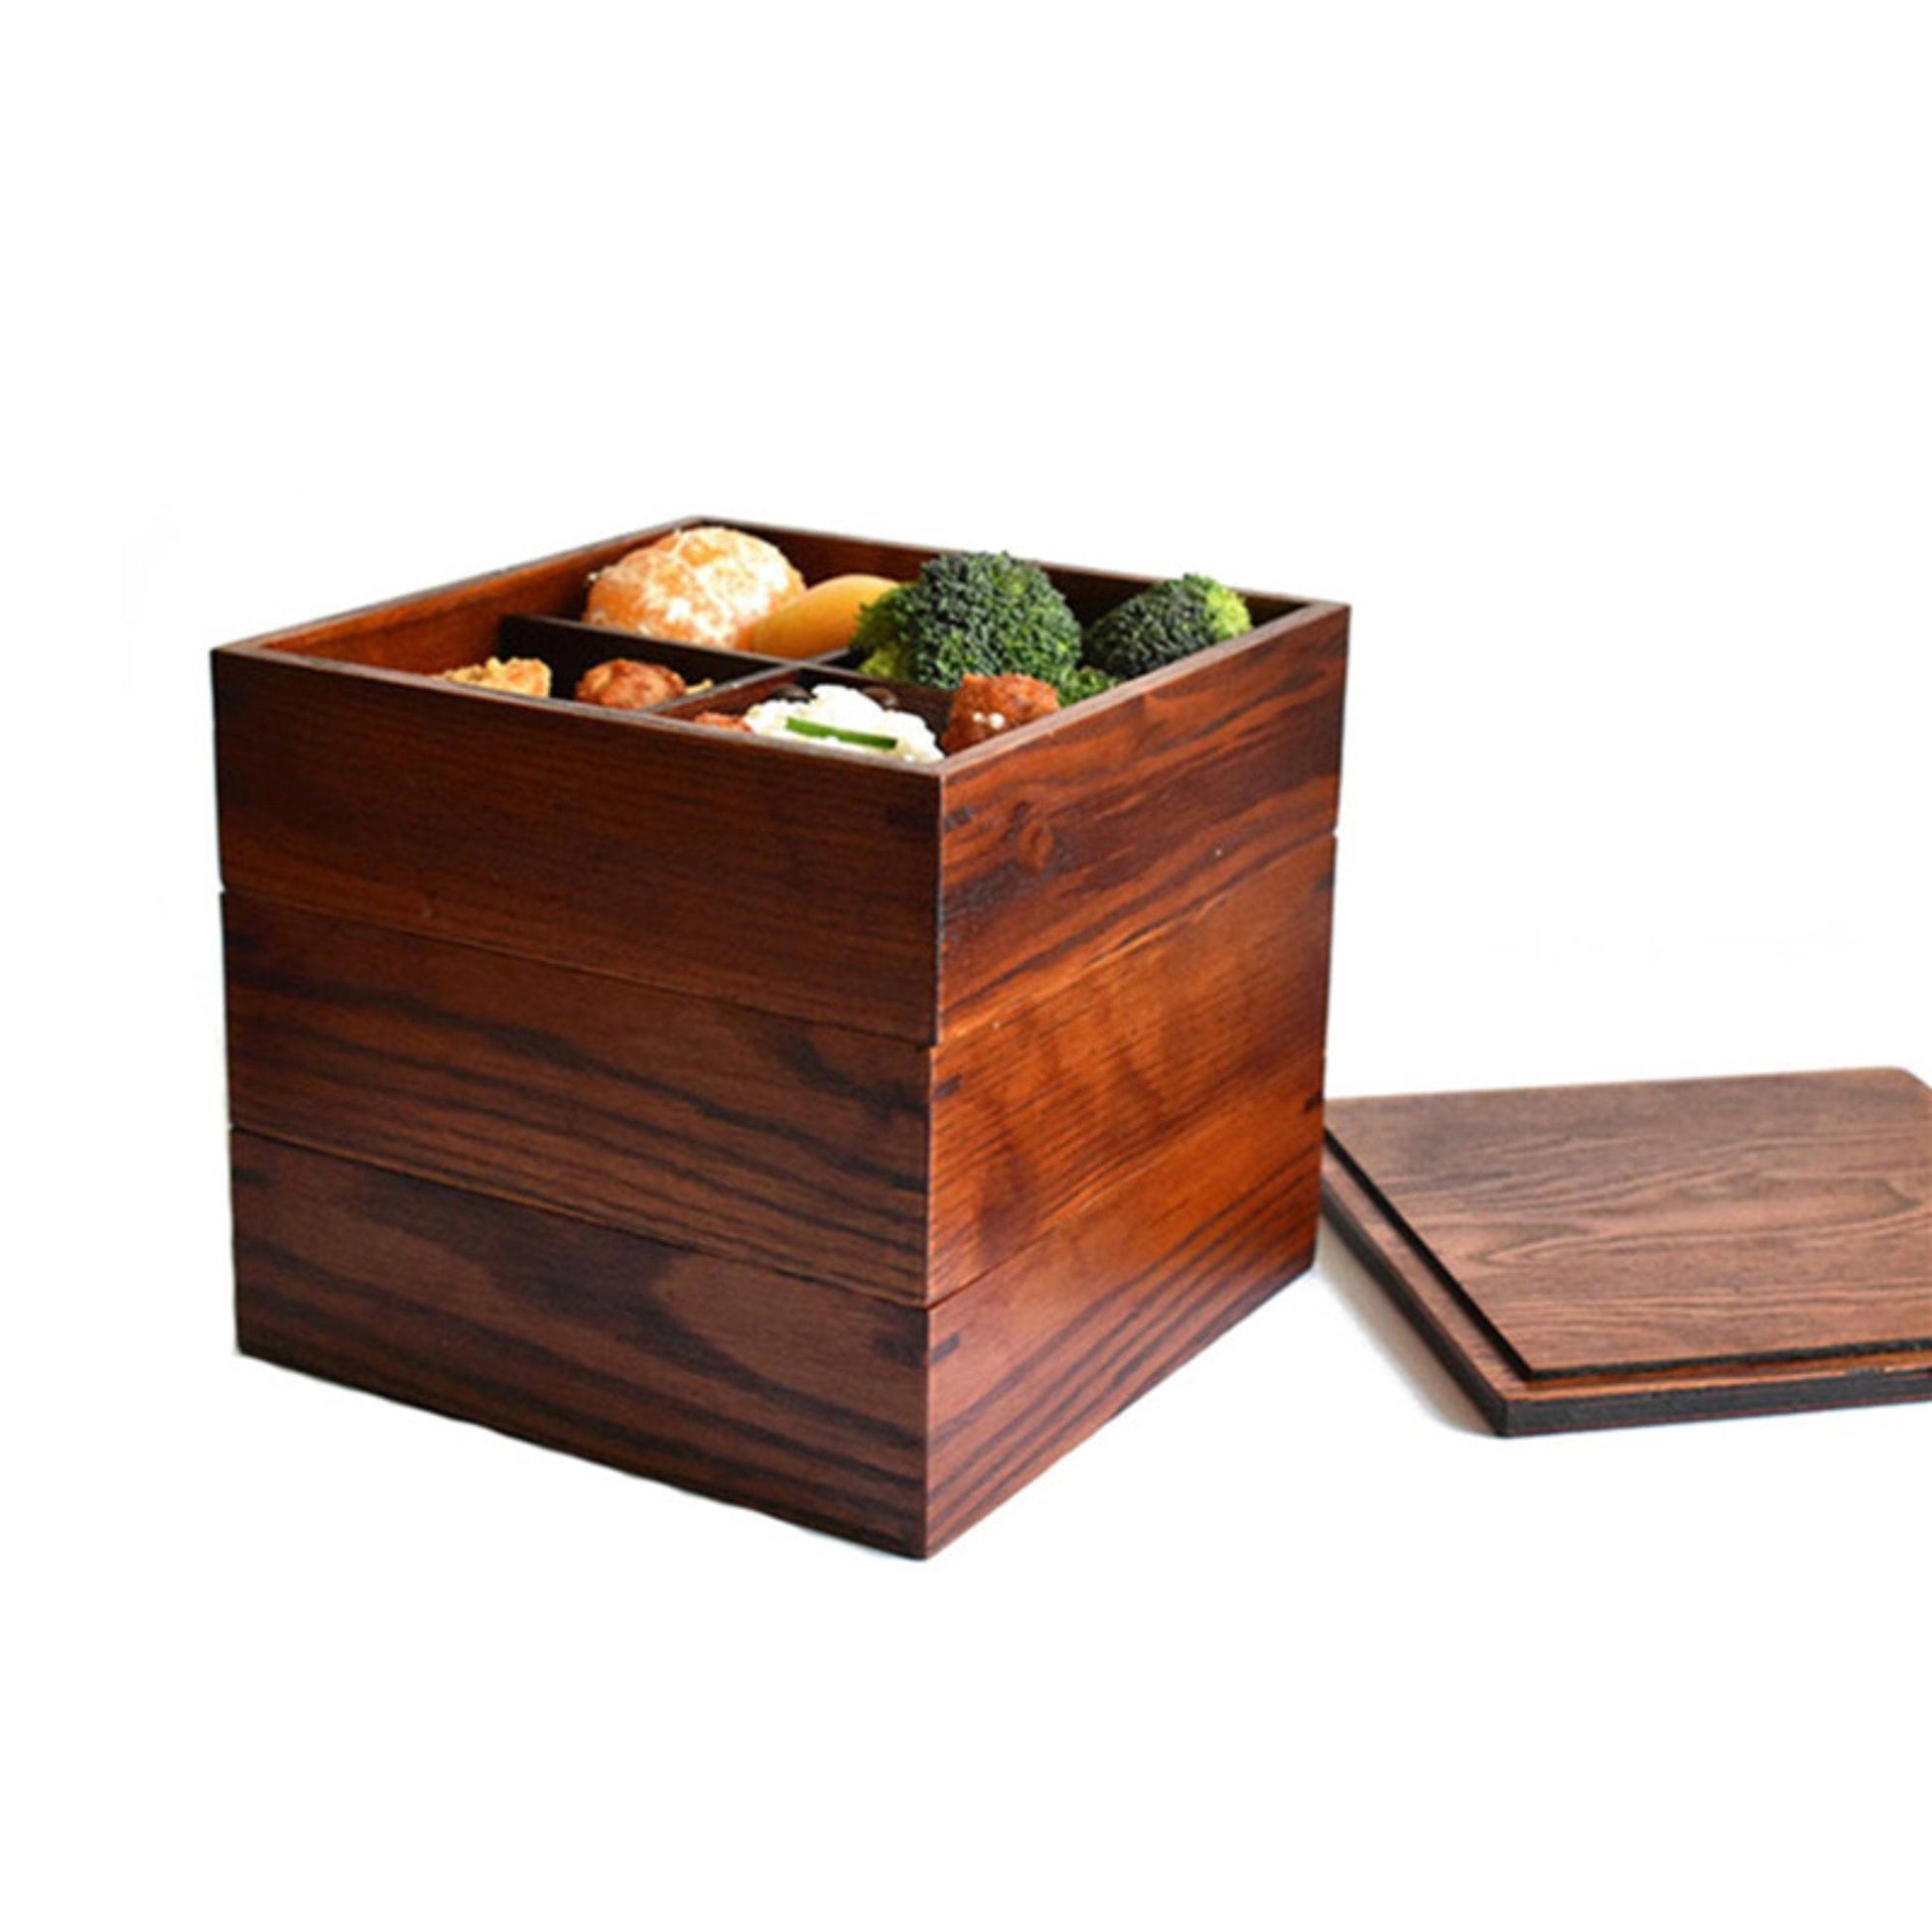 Japanese-style Wooden Bento Box Picnic Food Container Storage Bag and 7pc  Wooden Cutlery Set Lunch Box 